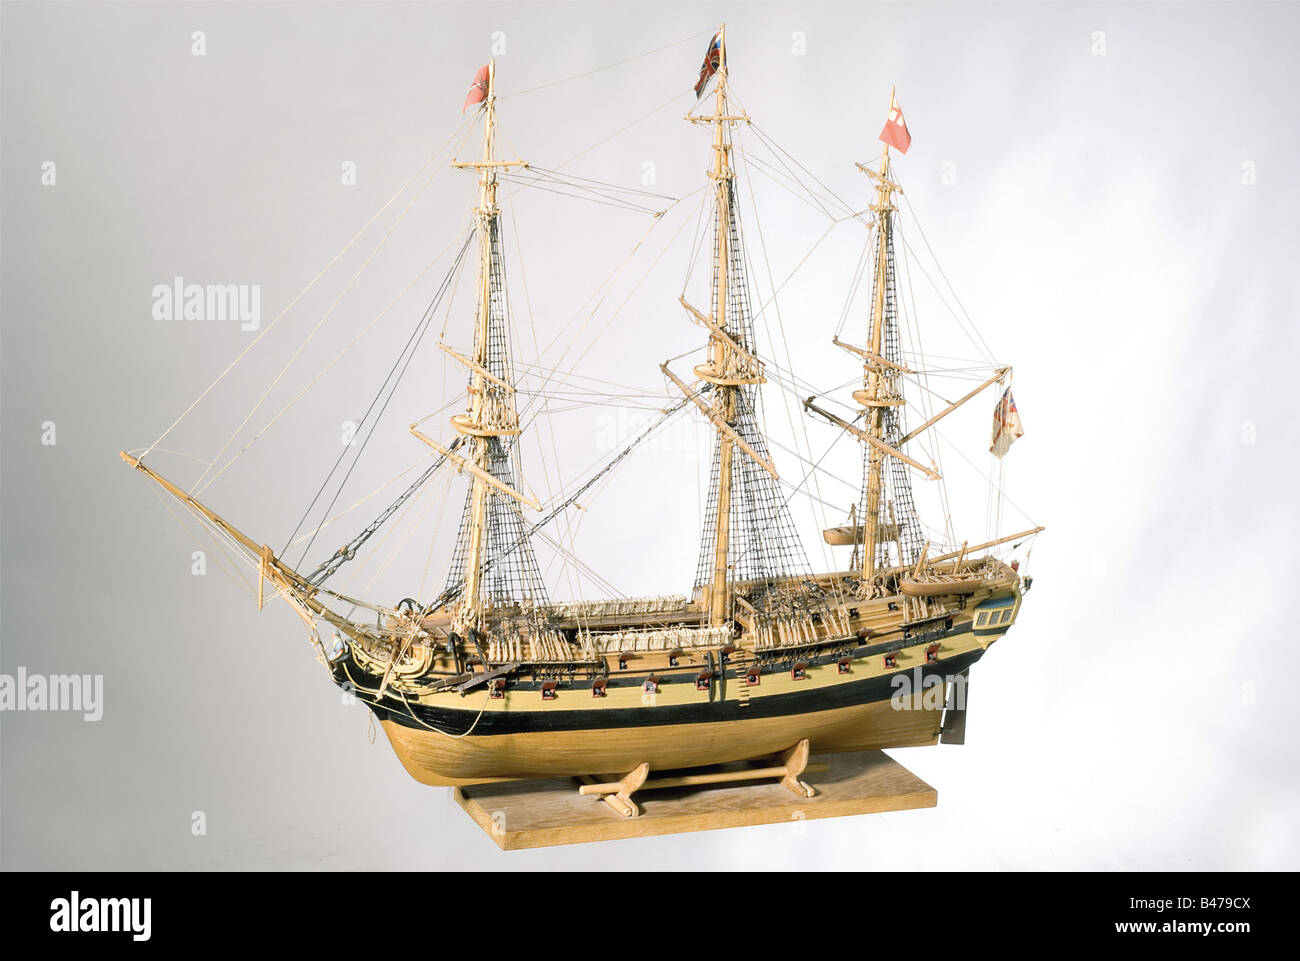 The frigate 'HMS Serapis'., An elaborate, wooden model of a Royal Navy frigate. Fully rigged masts, open gun ports. Stern and rigging painted in colour. Length 100 cm. Width 36 cm. Height 84 cm. The HMS Serapis came off the ways in 1779 as a fifth rate ship of war. On 23 September of that same year, she engaged the weaker 'Bonhomme Richard' under the command of the American Captain, John Paul Jones, in the North Sea. In spite of heavy damage to his ship, Jones refused to strike his colours with the words, 'I have not yet begun to fight', and then boarded and ca, Stock Photo